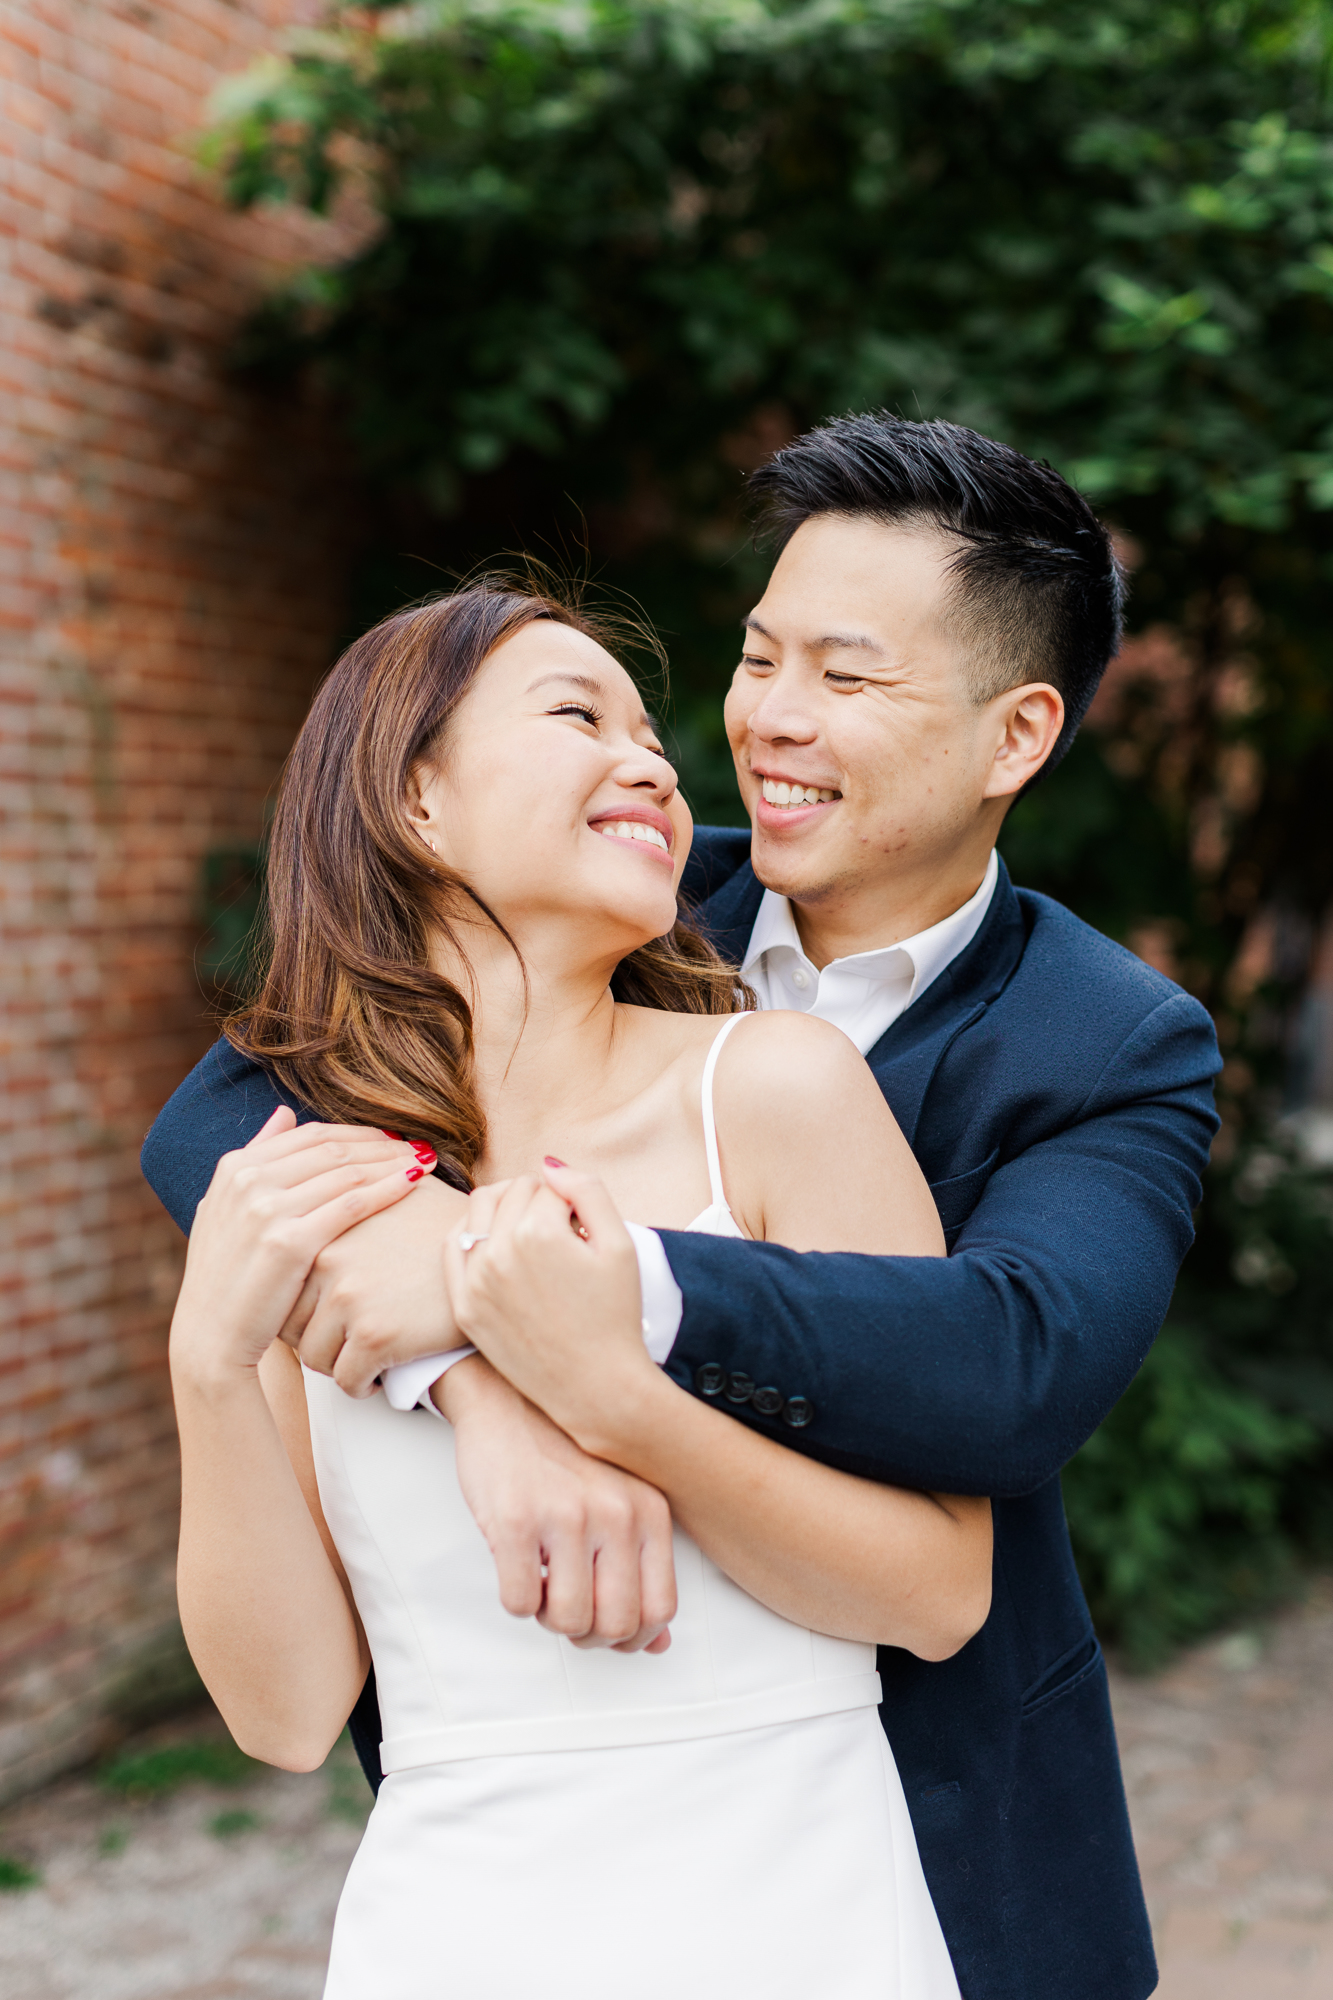 Gorgeous New York Engagement Photography with Spring Blossoms